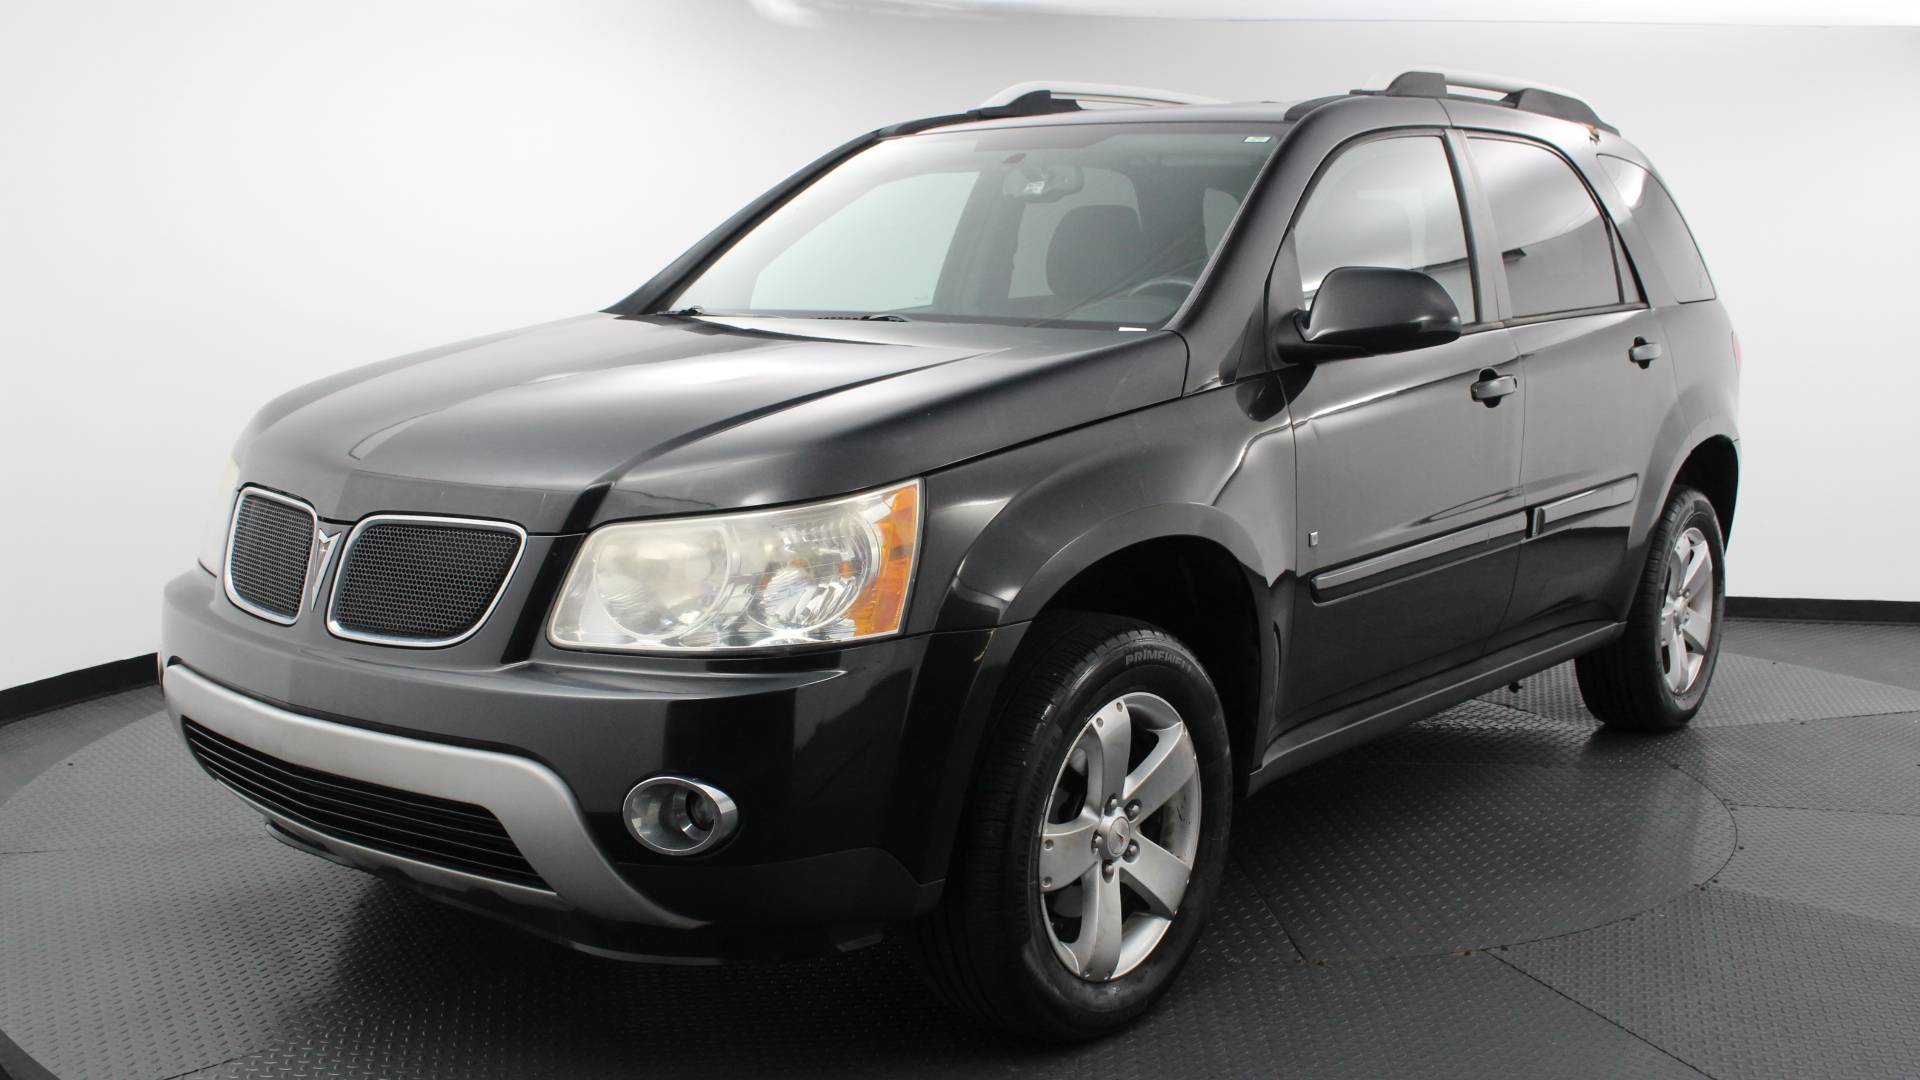 Used 2009 PONTIAC TORRENT for sale in WEST PALM | 121246